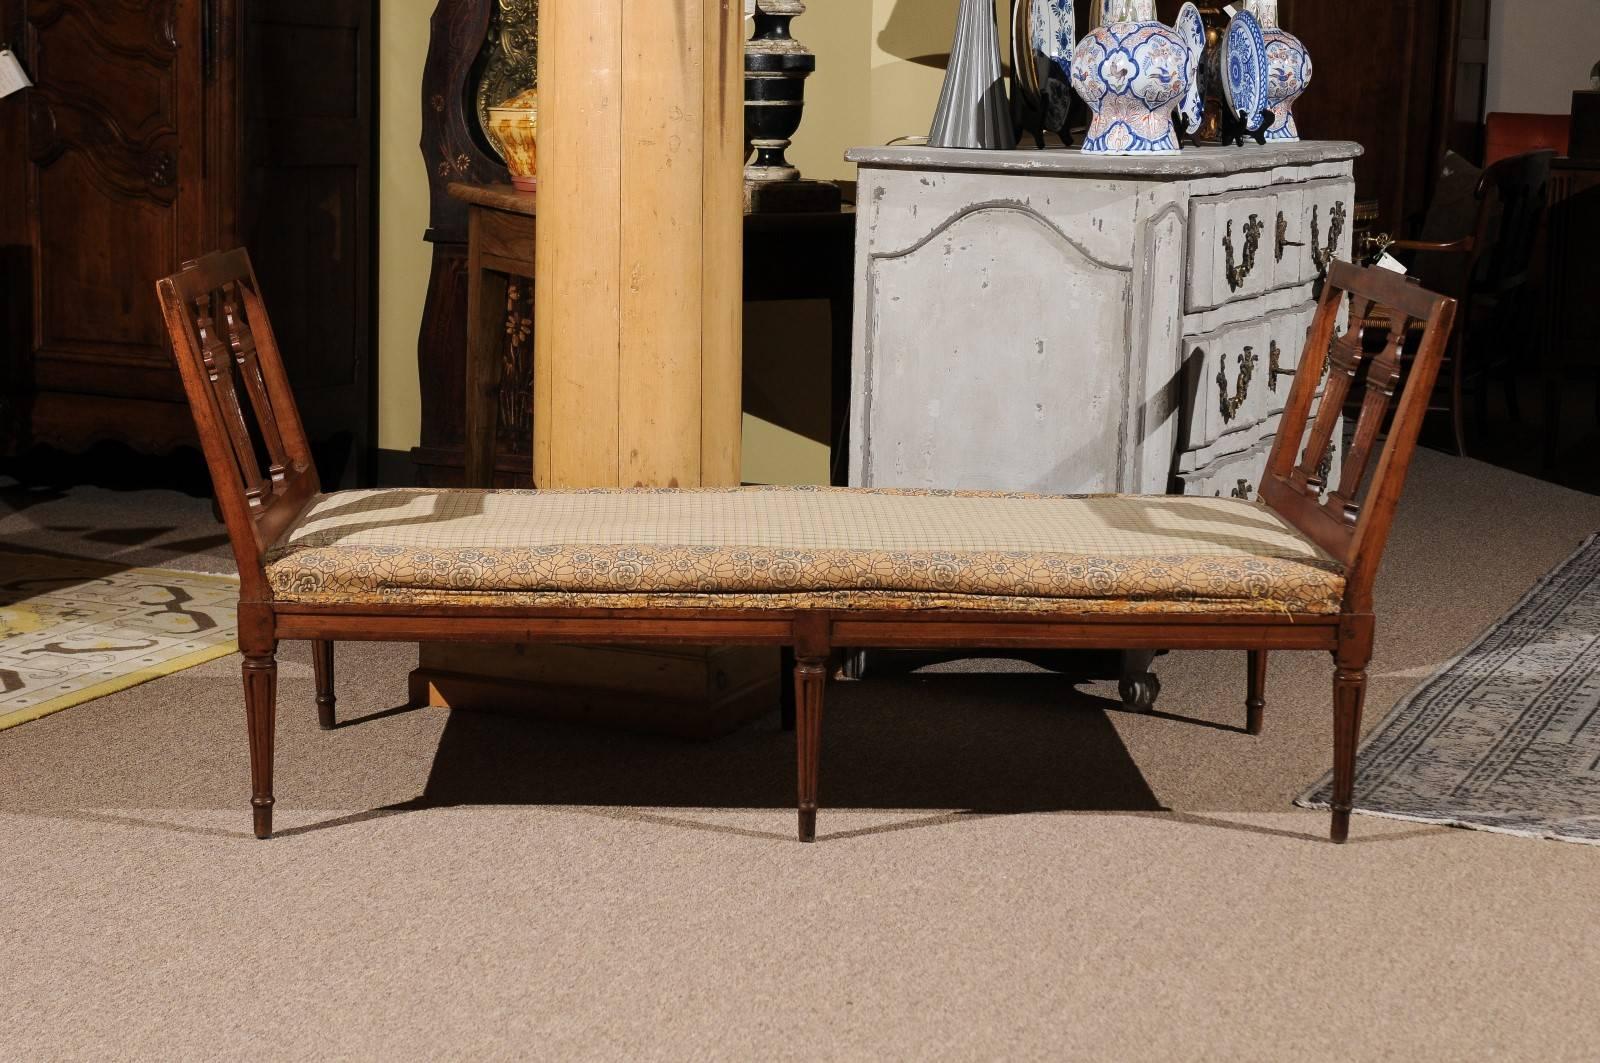 18th century Louis XVI period daybed, circa 1780
This divine daybed has wonderful detailing that is subtle but makes the piece elegant. You will need to upholster it and have a cushion made to make it totally magnificent.